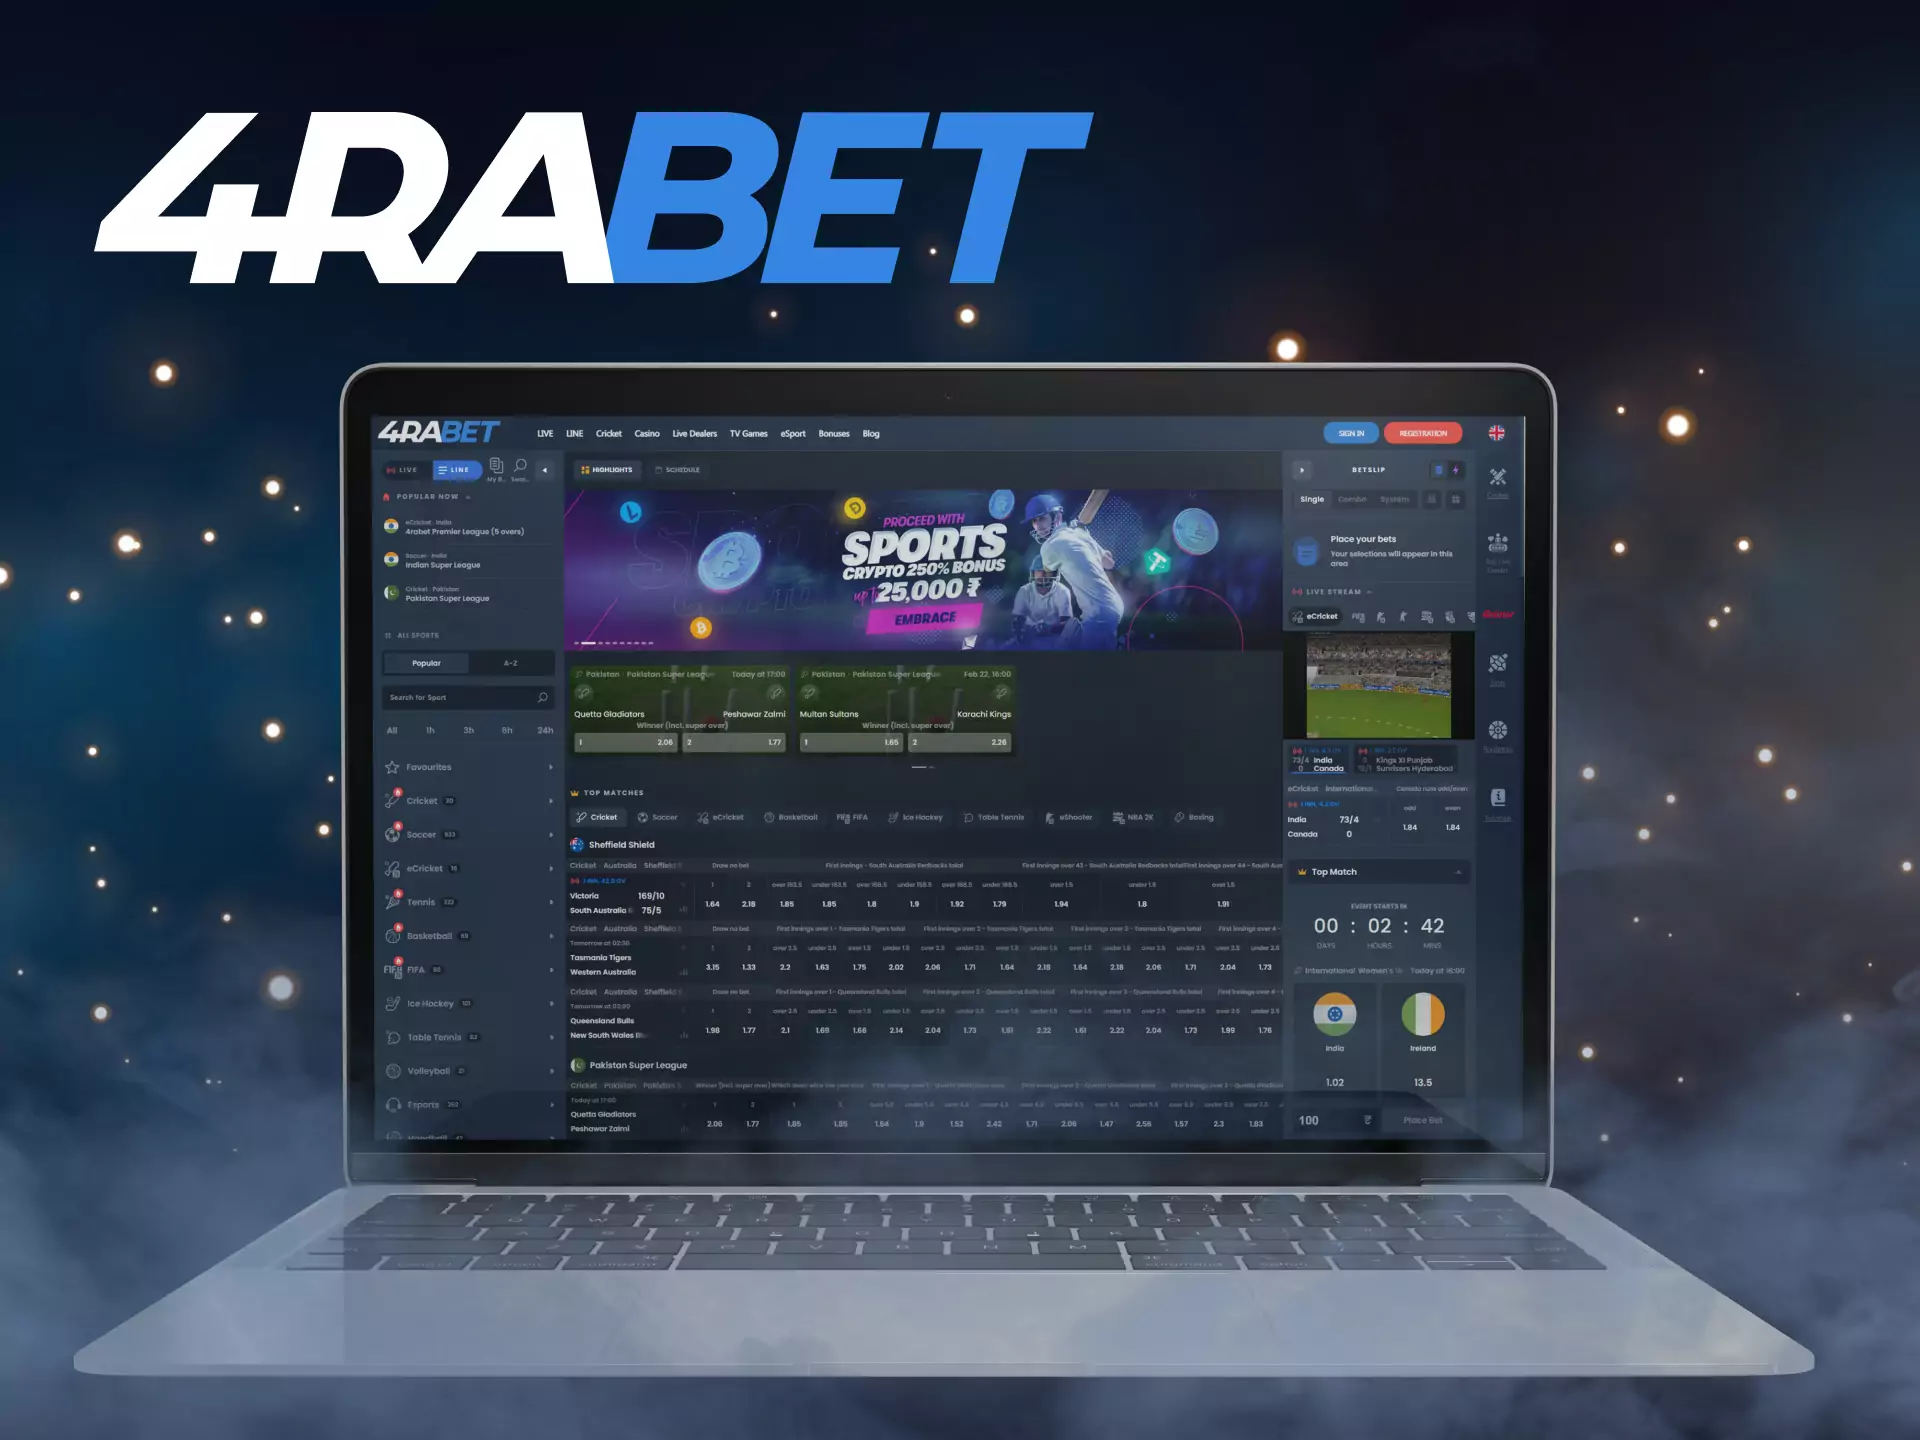 With 4rabet you can bet and play casino games on your personal computer on Windows or macOS.